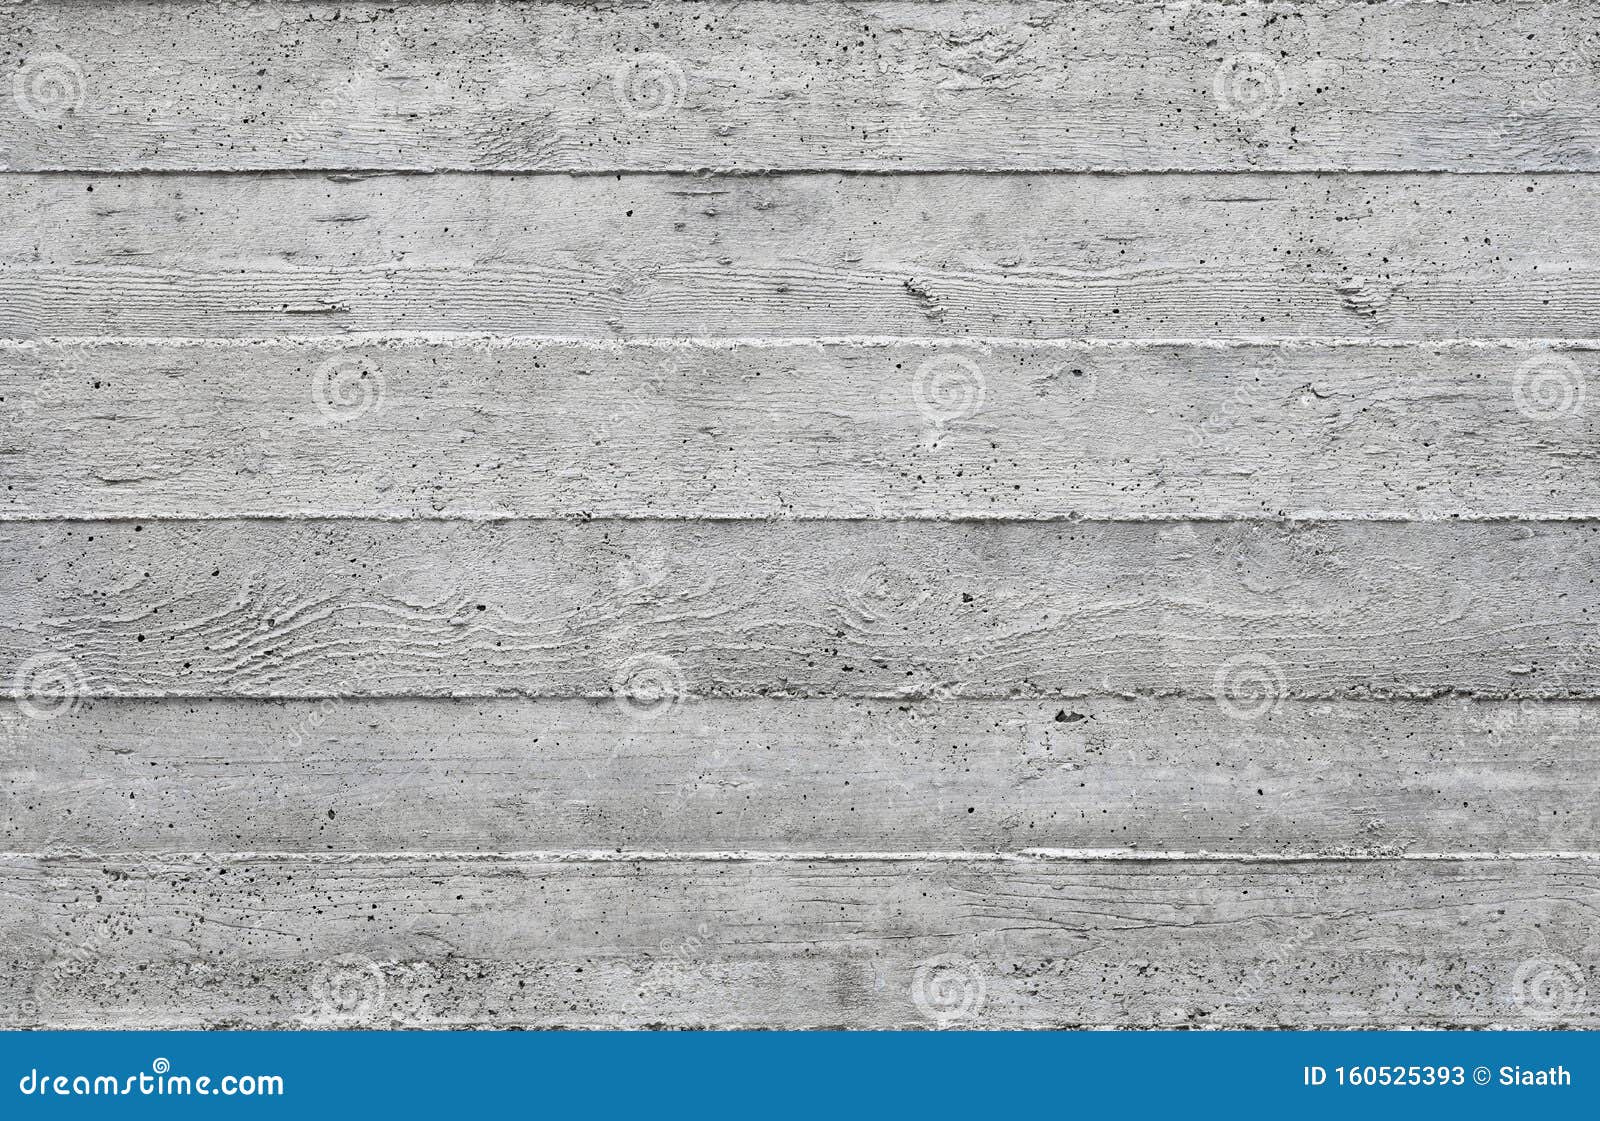 https://thumbs.dreamstime.com/z/board-formed-bare-concrete-seamless-texture-architectural-applications-board-formed-concrete-seamless-texture-160525393.jpg